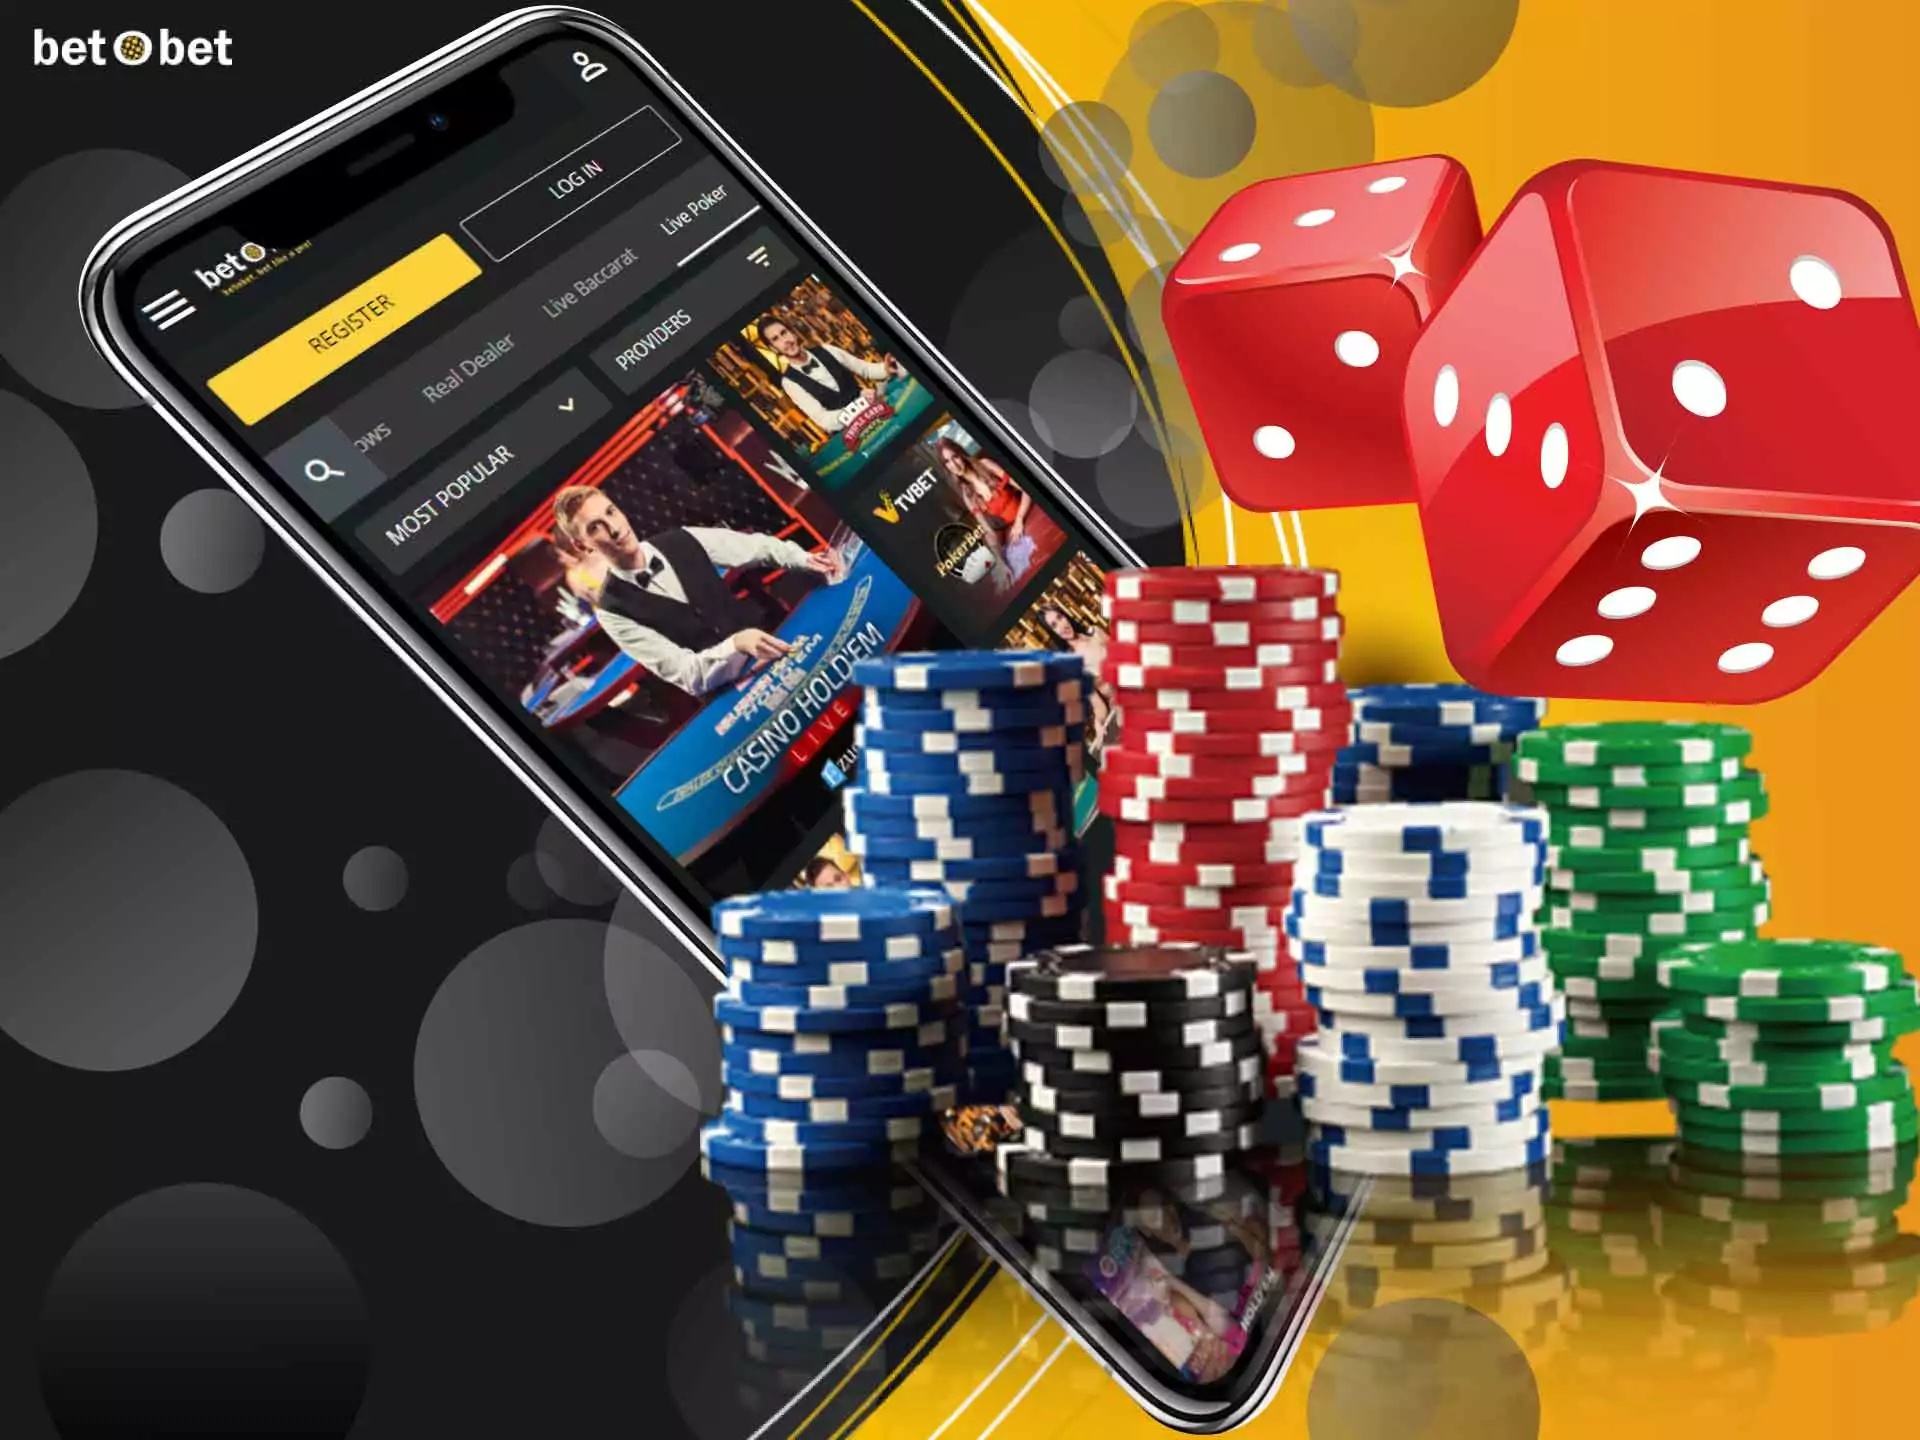 You can also play poker games with real dealers in the BetOBet casino.